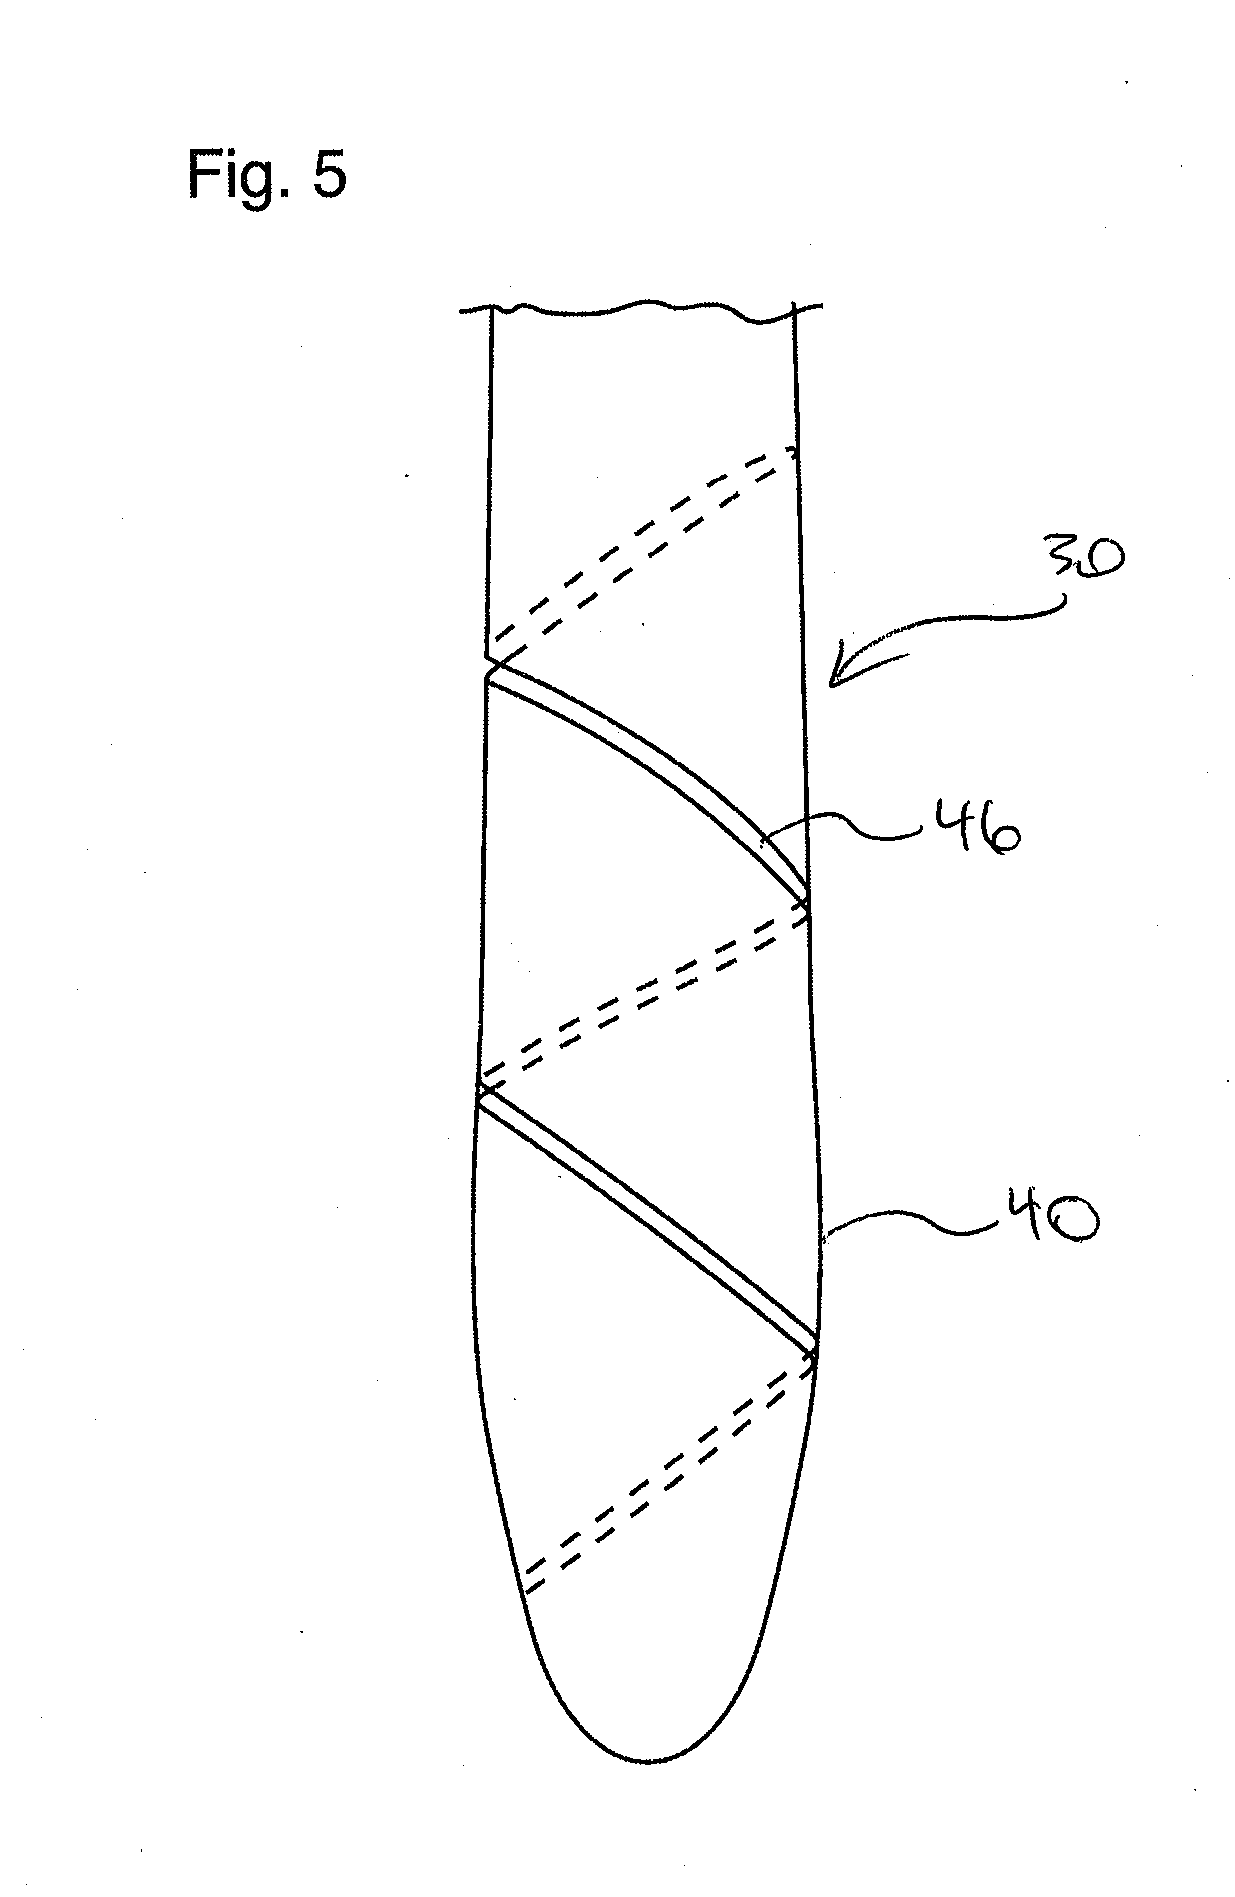 Endodontic cleaning instrument and apparatus